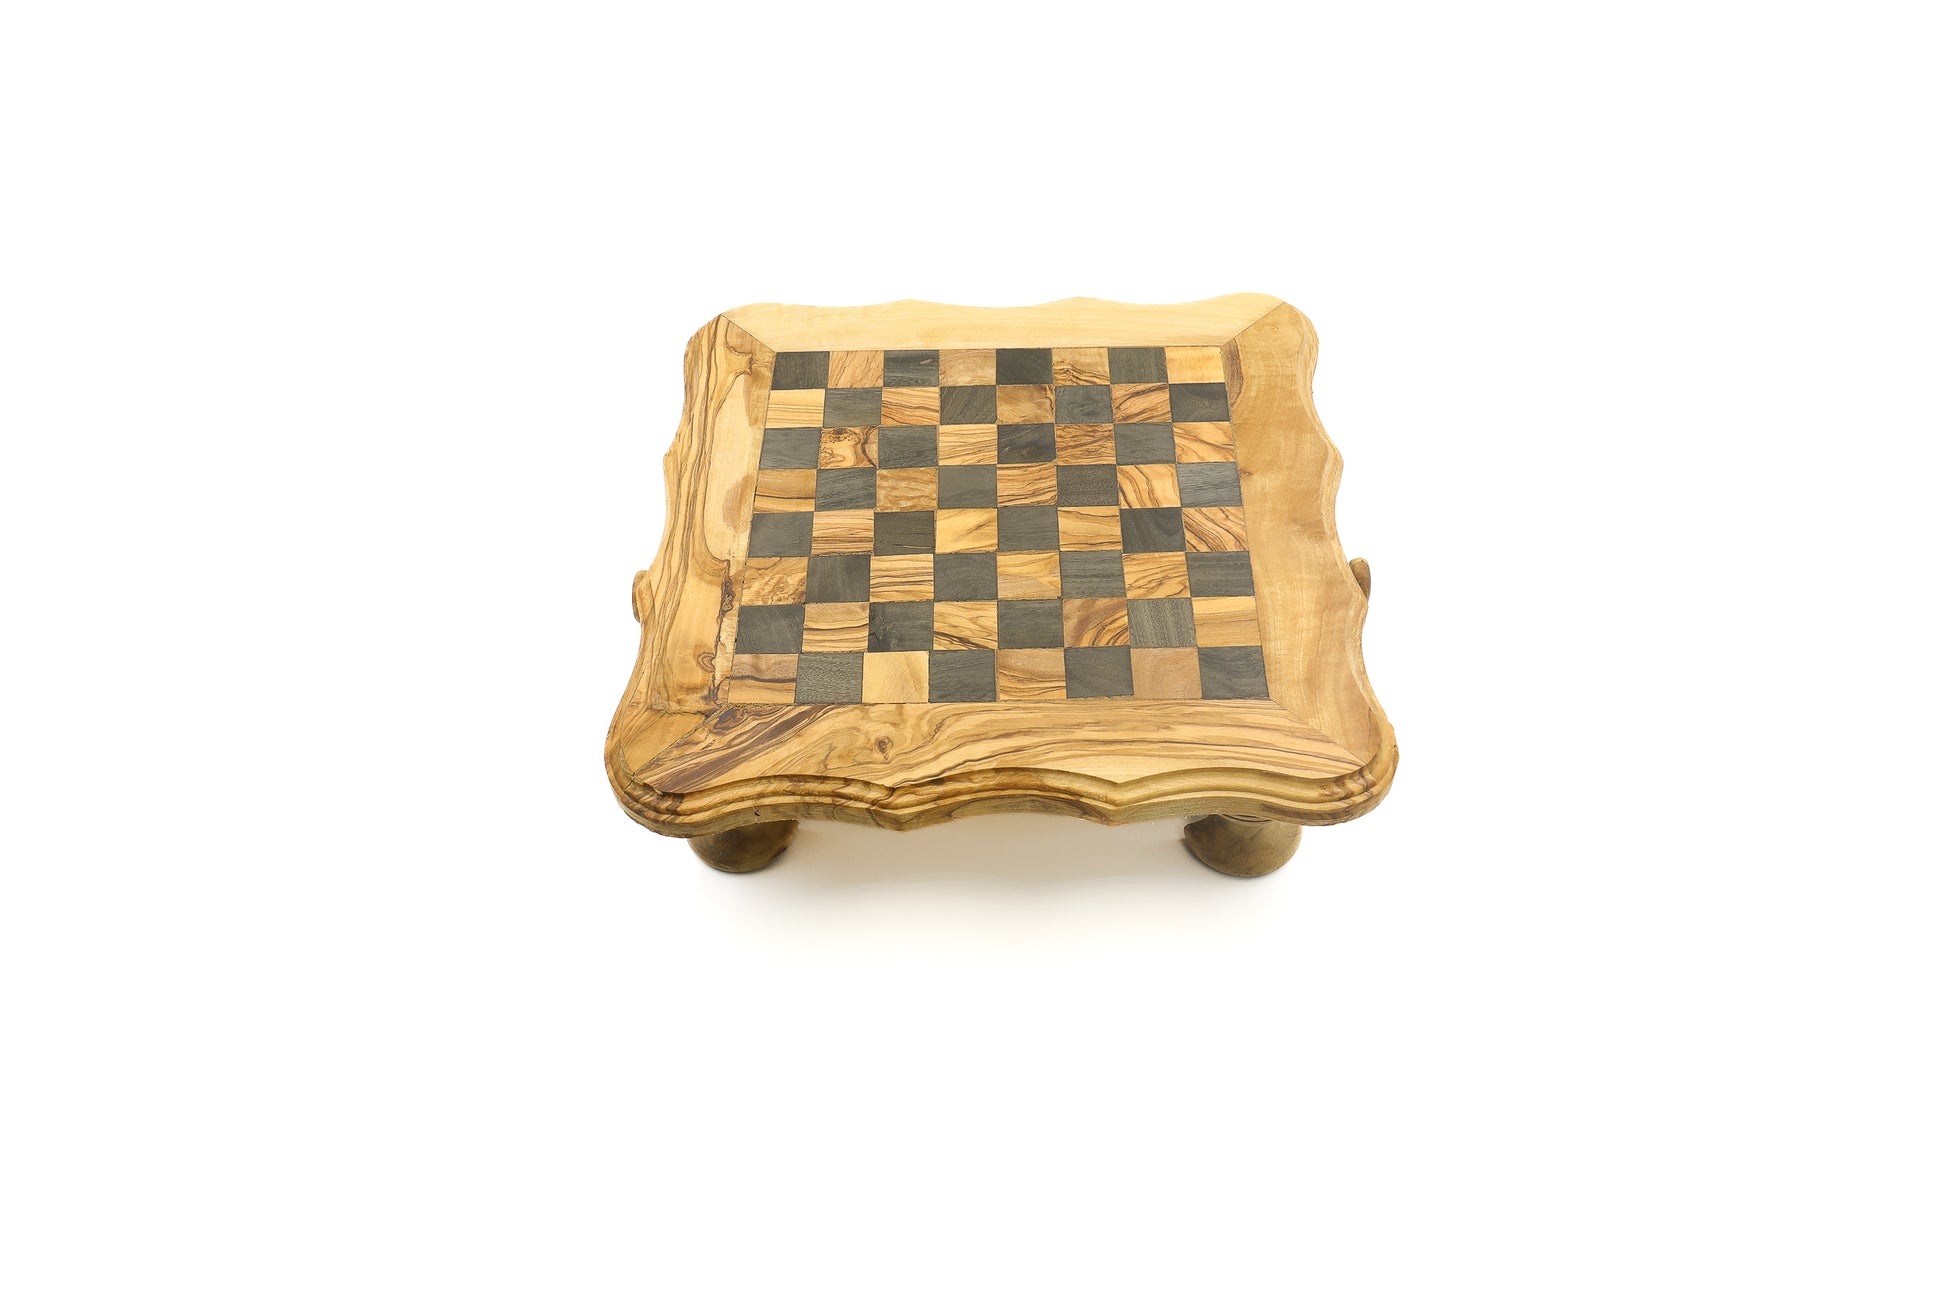 Rustic and hand-carved olive wood chess set with a natural appeal